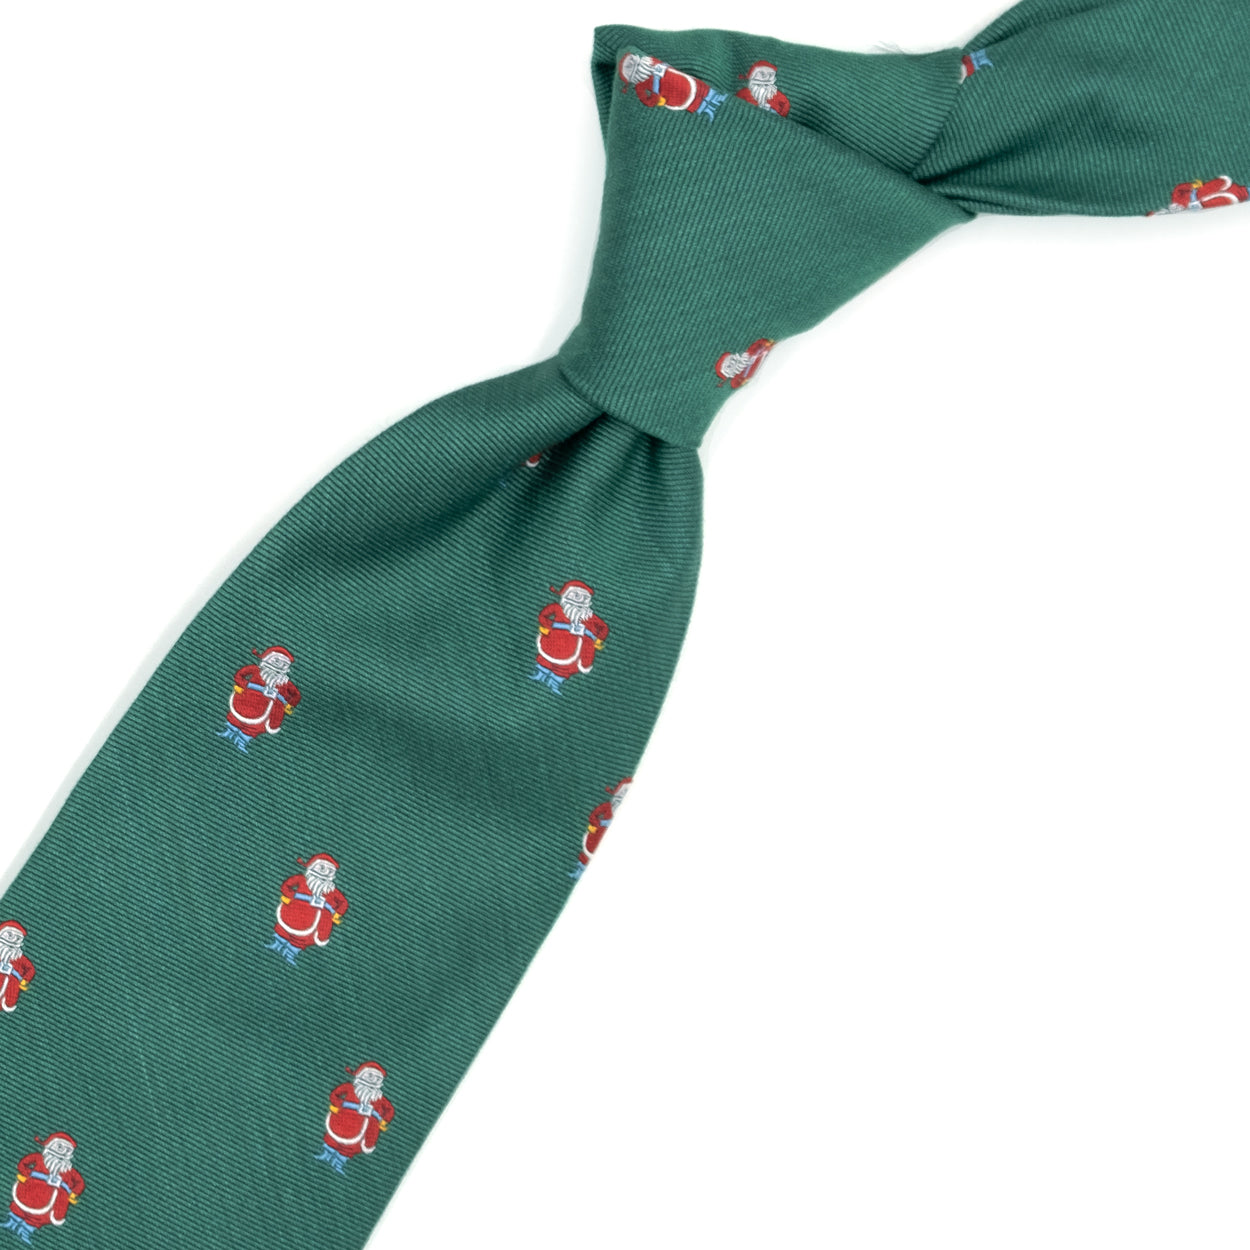 Green tie with Santa Claus pattern